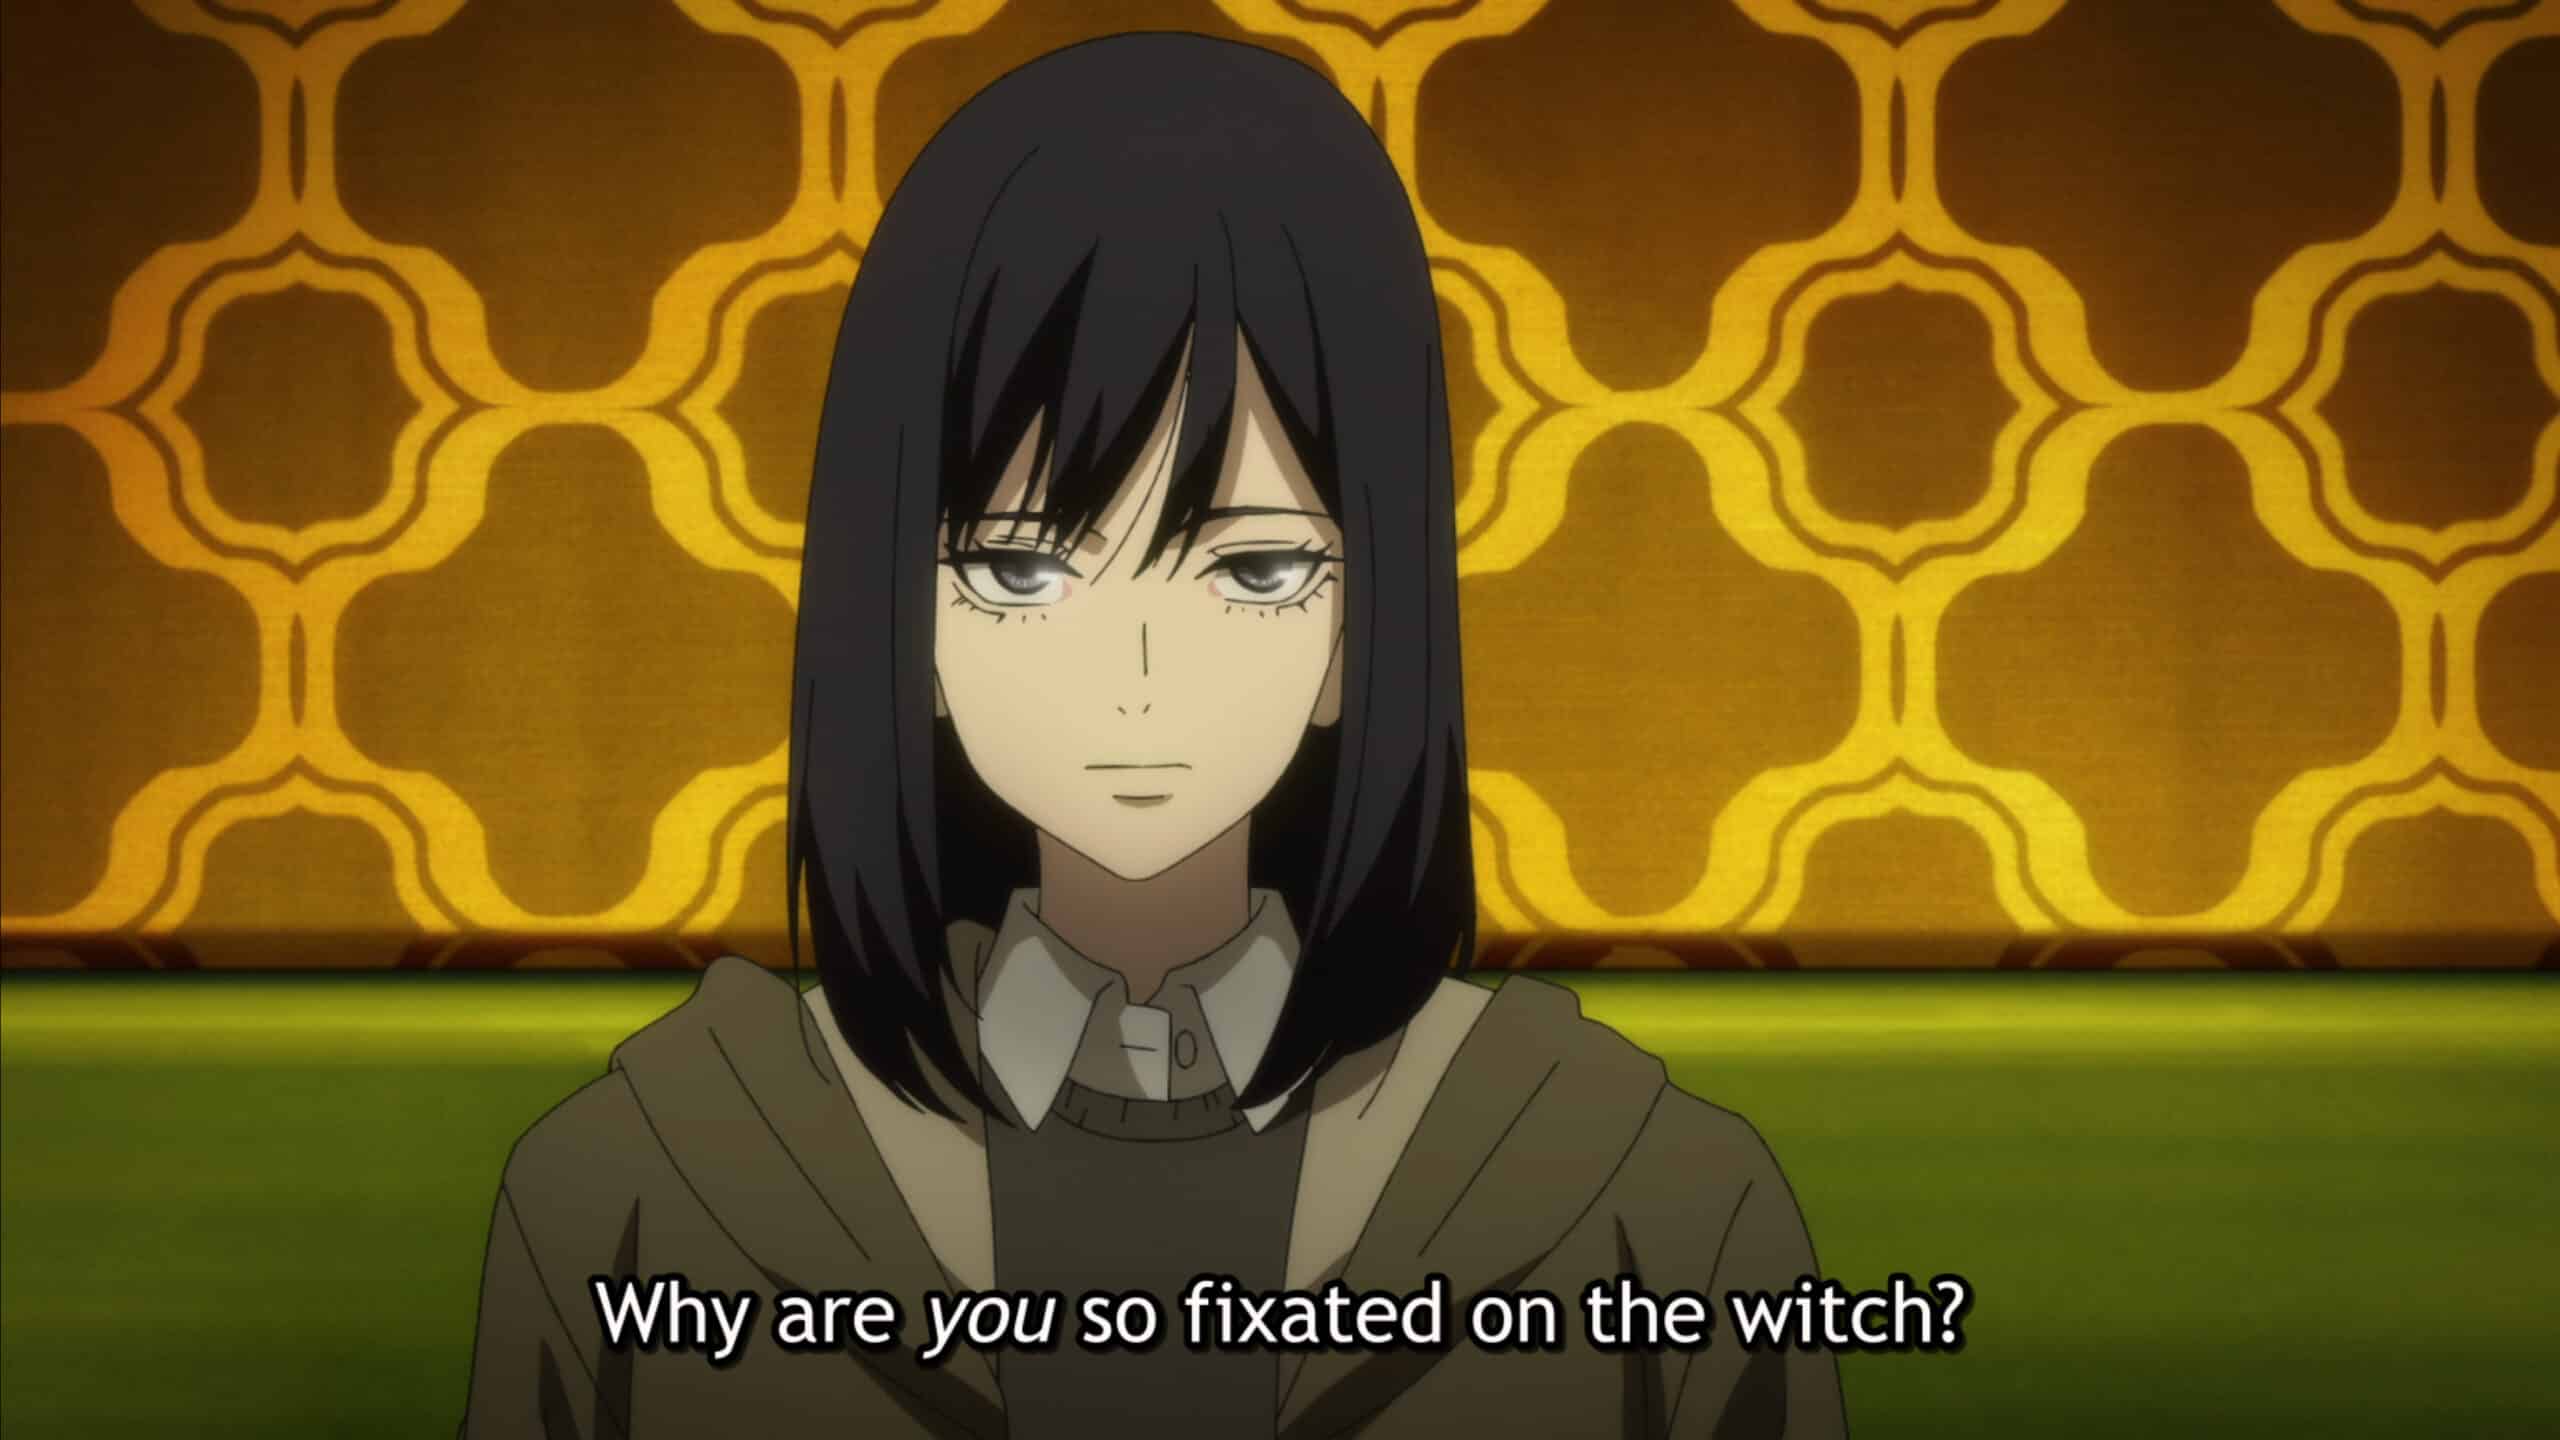 Ms. Haines (Junko Minagawa) asking Guideau about her obsession over a witch